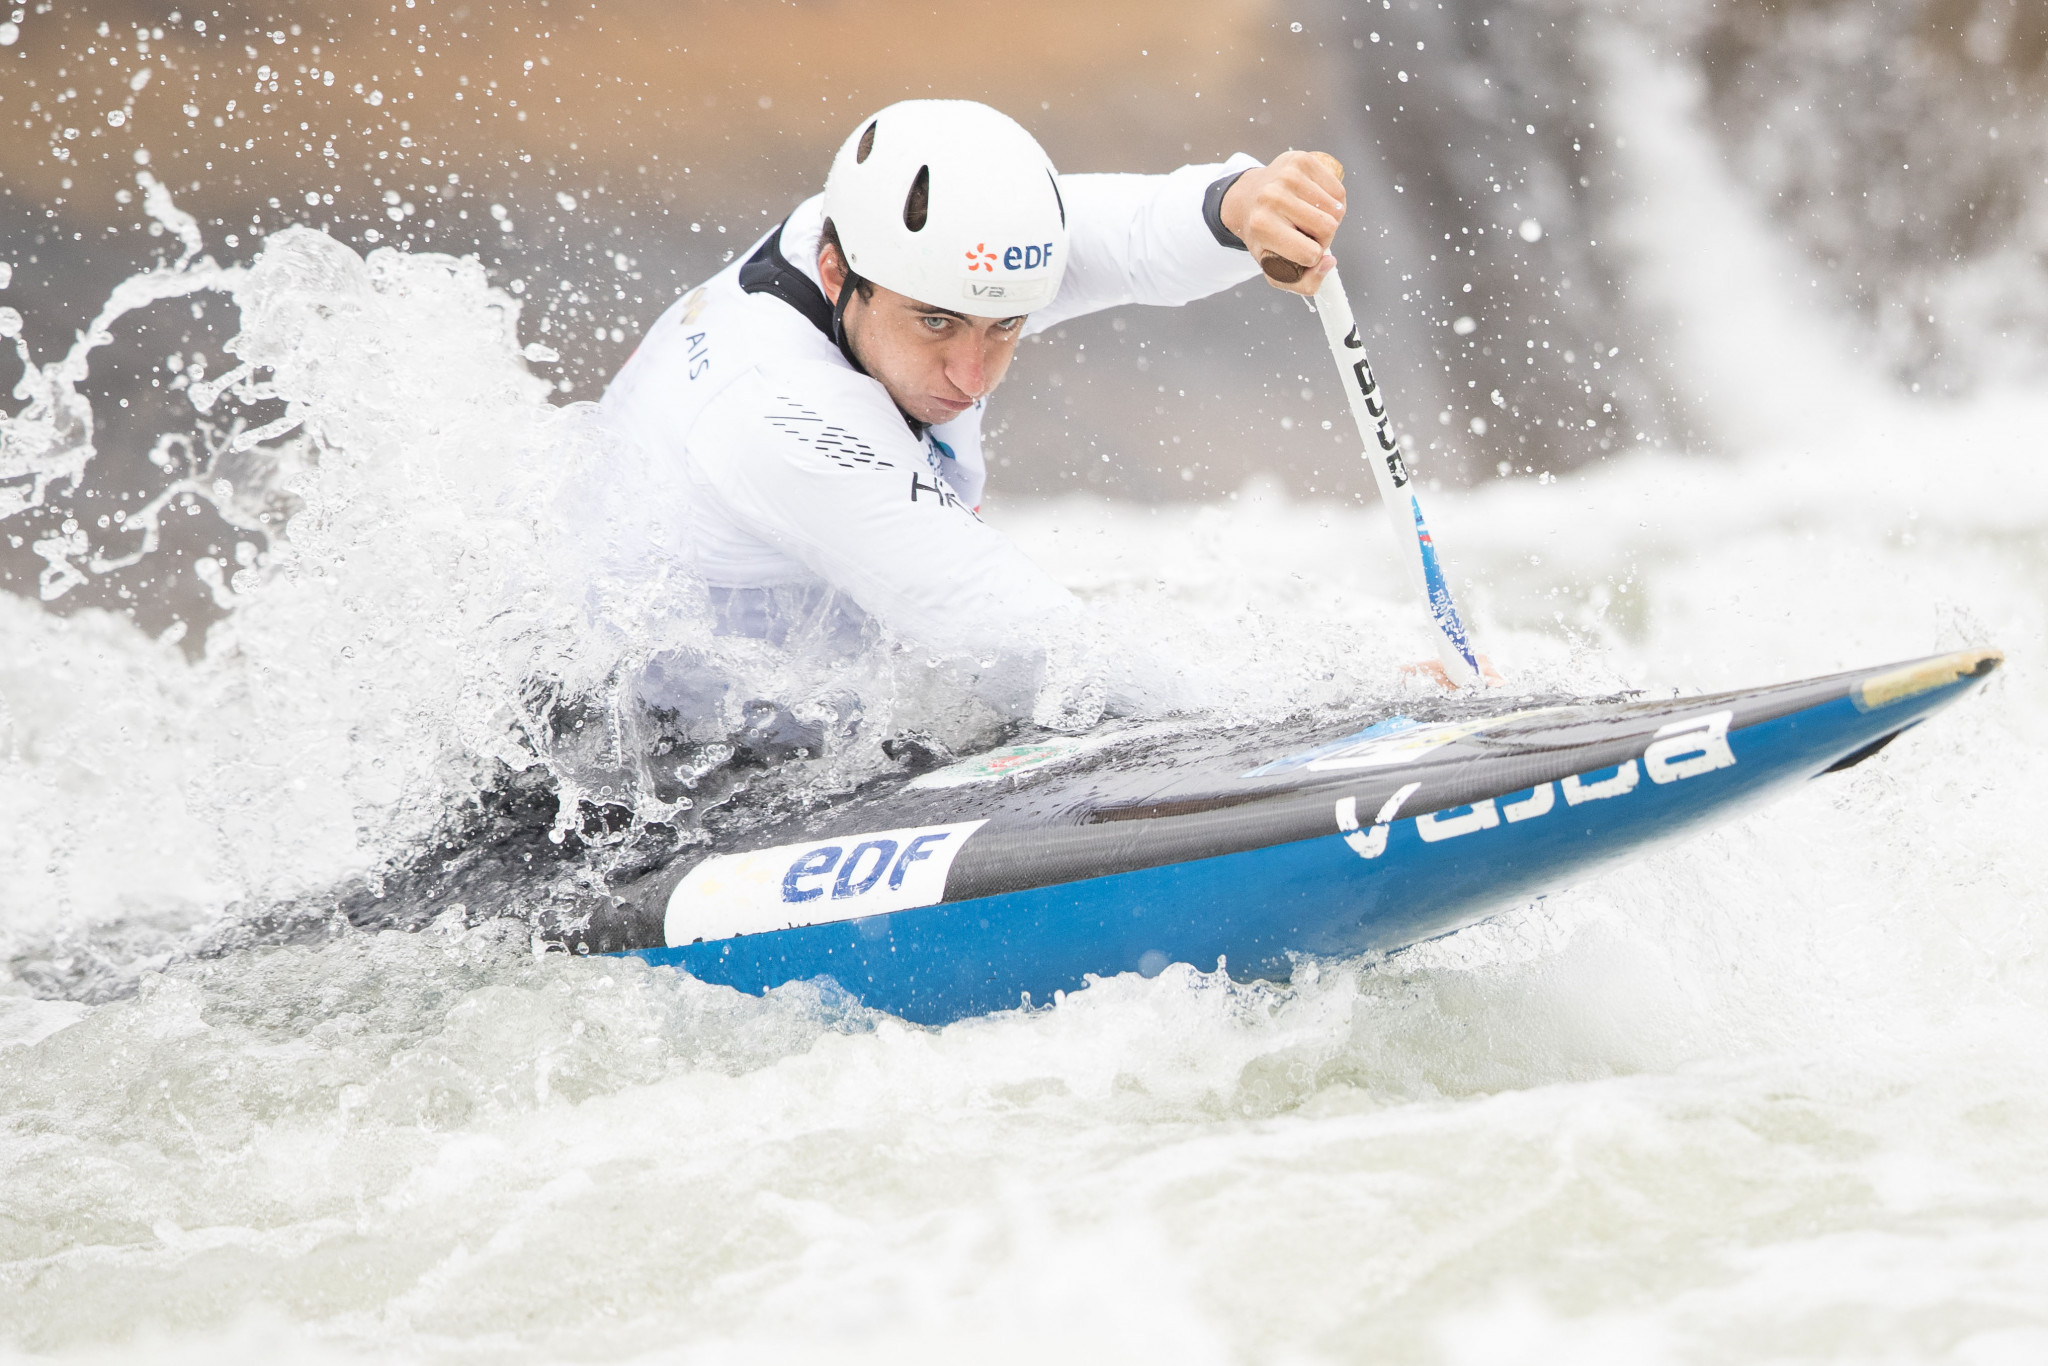 Cédric Joly will make his first appearance of the ICF Canoe Slalom World Cup season this weekend ©Getty Images